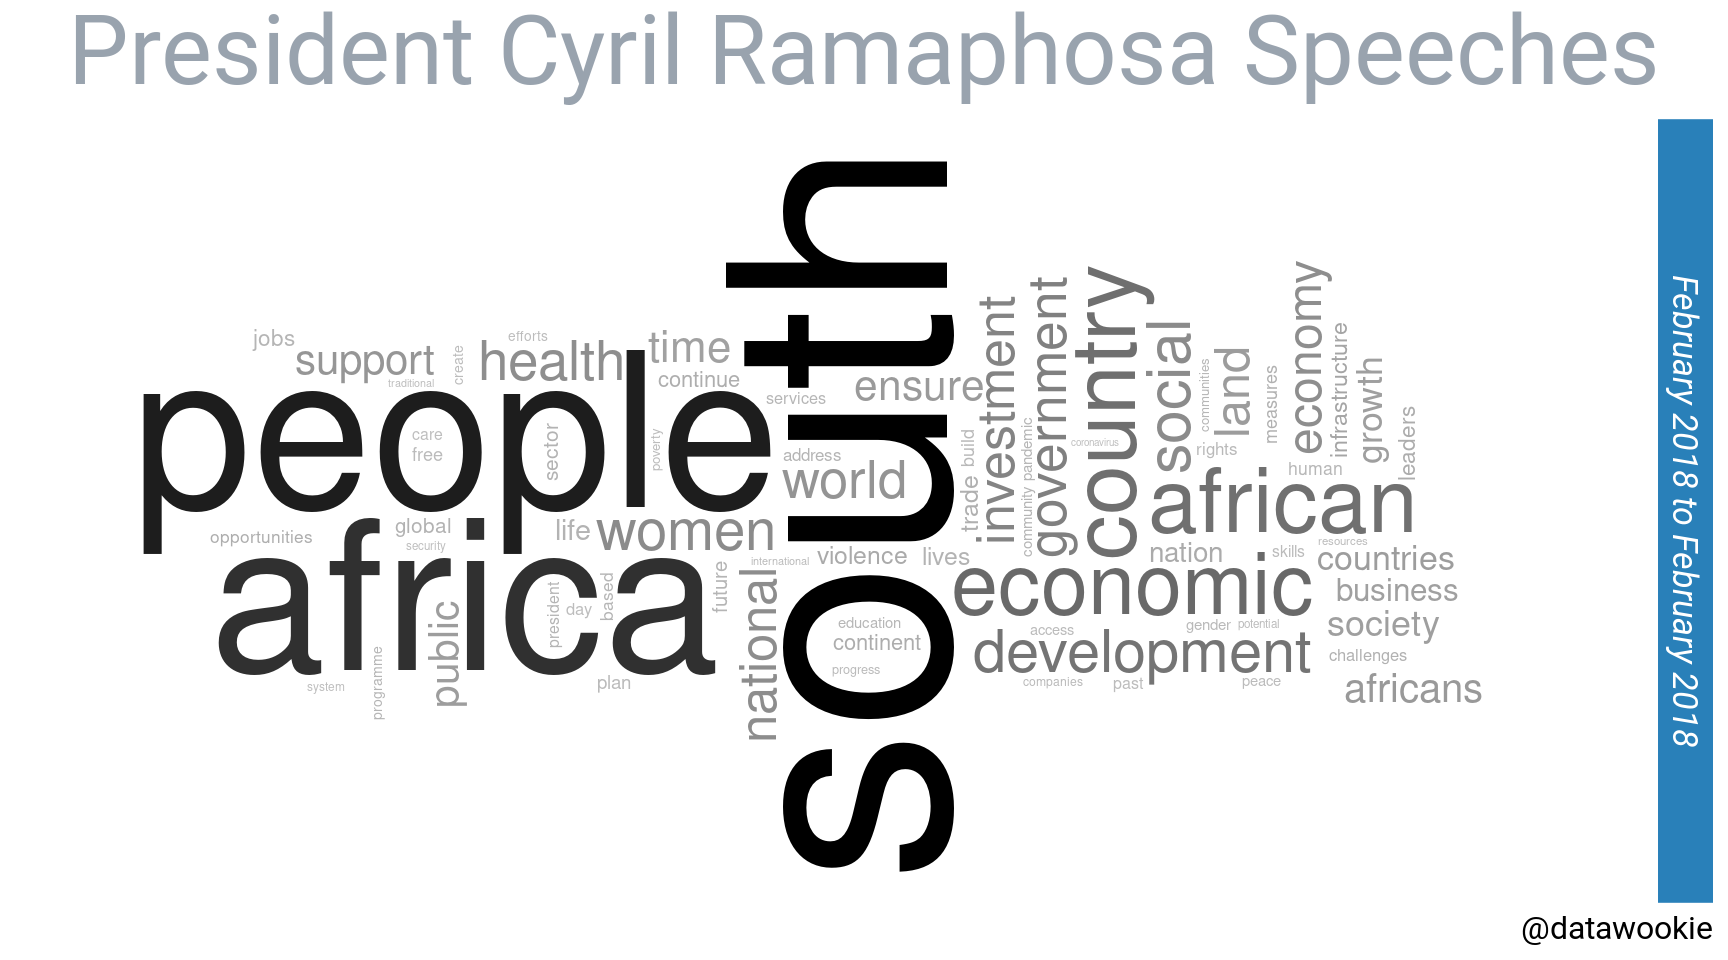 Word cloud showing word frequency in Cyril Ramaphosa's speeches.